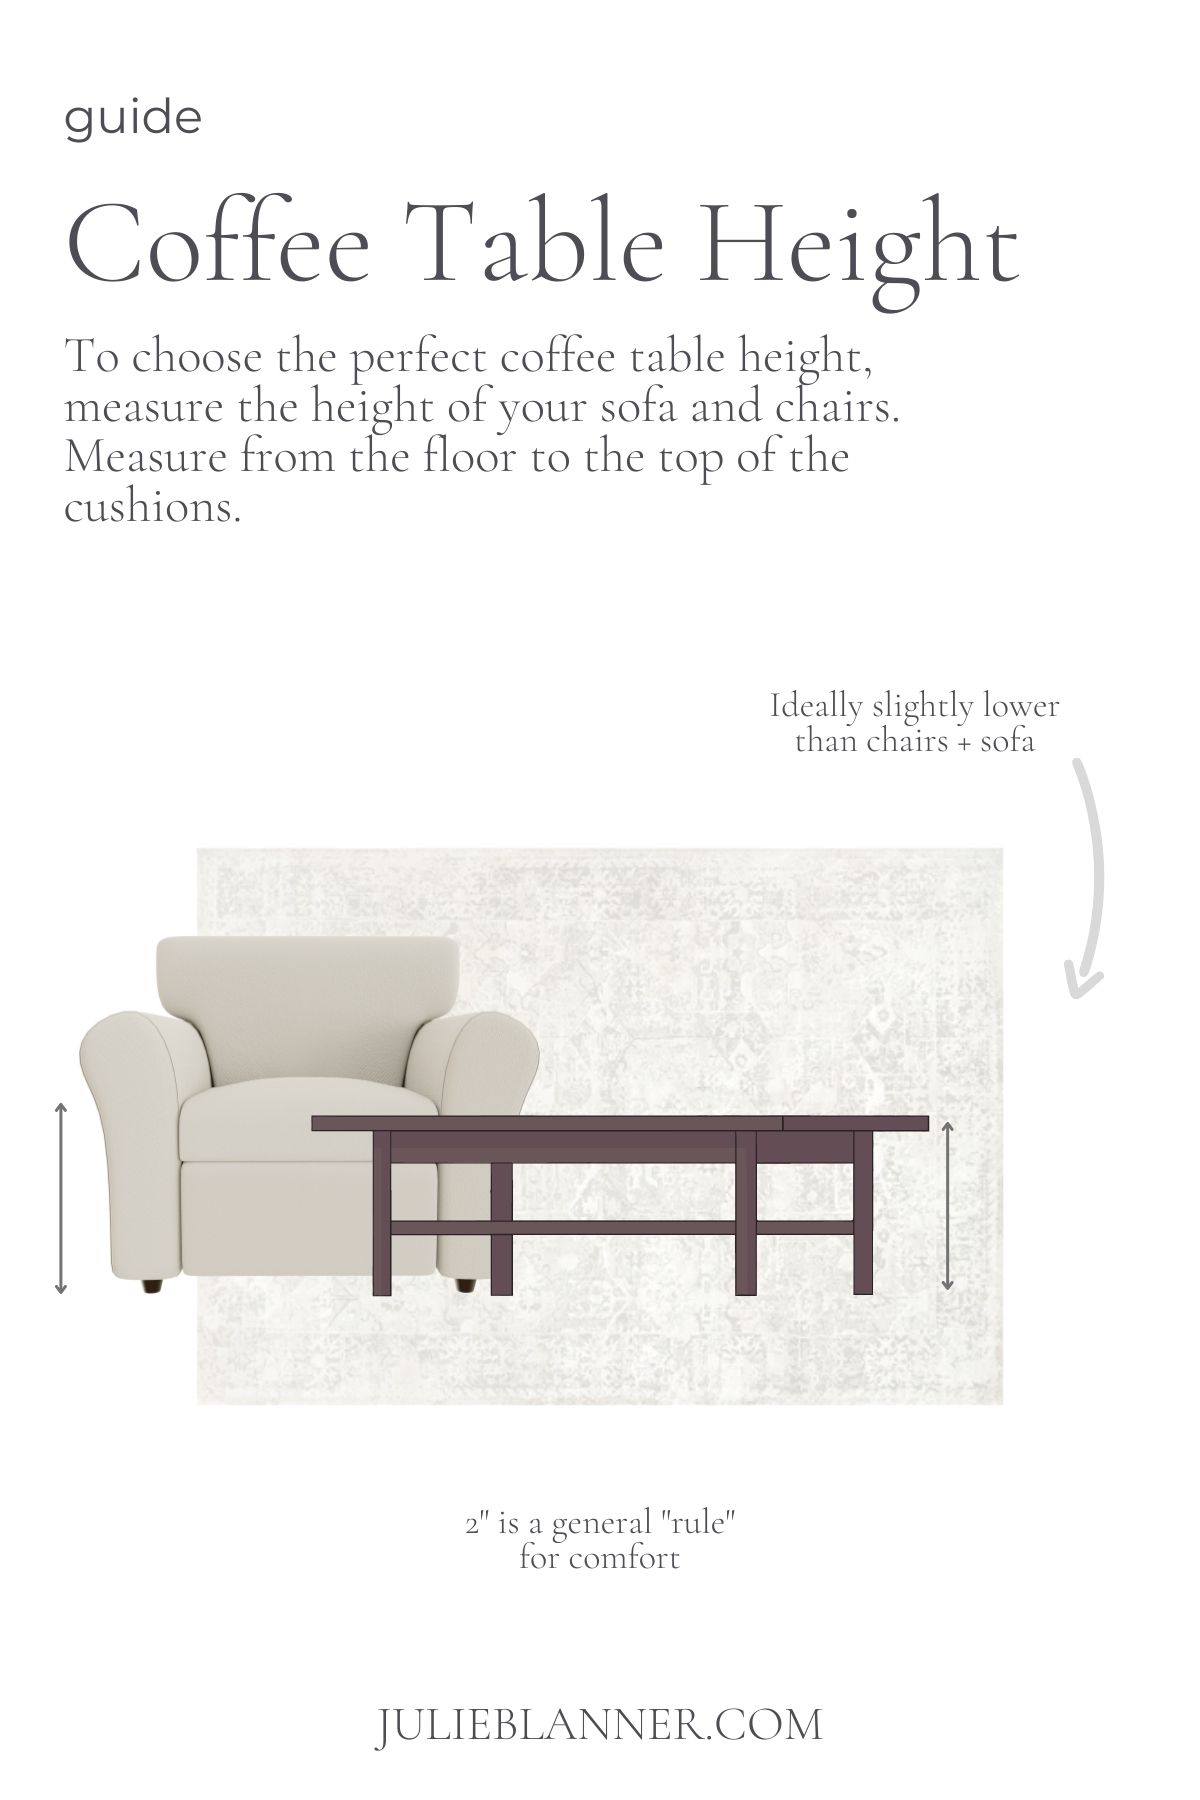 A graphic image featuring an upholstered chair, rug, and coffee table. Title reads "Coffee Table Height" and provides a size guide in the text.